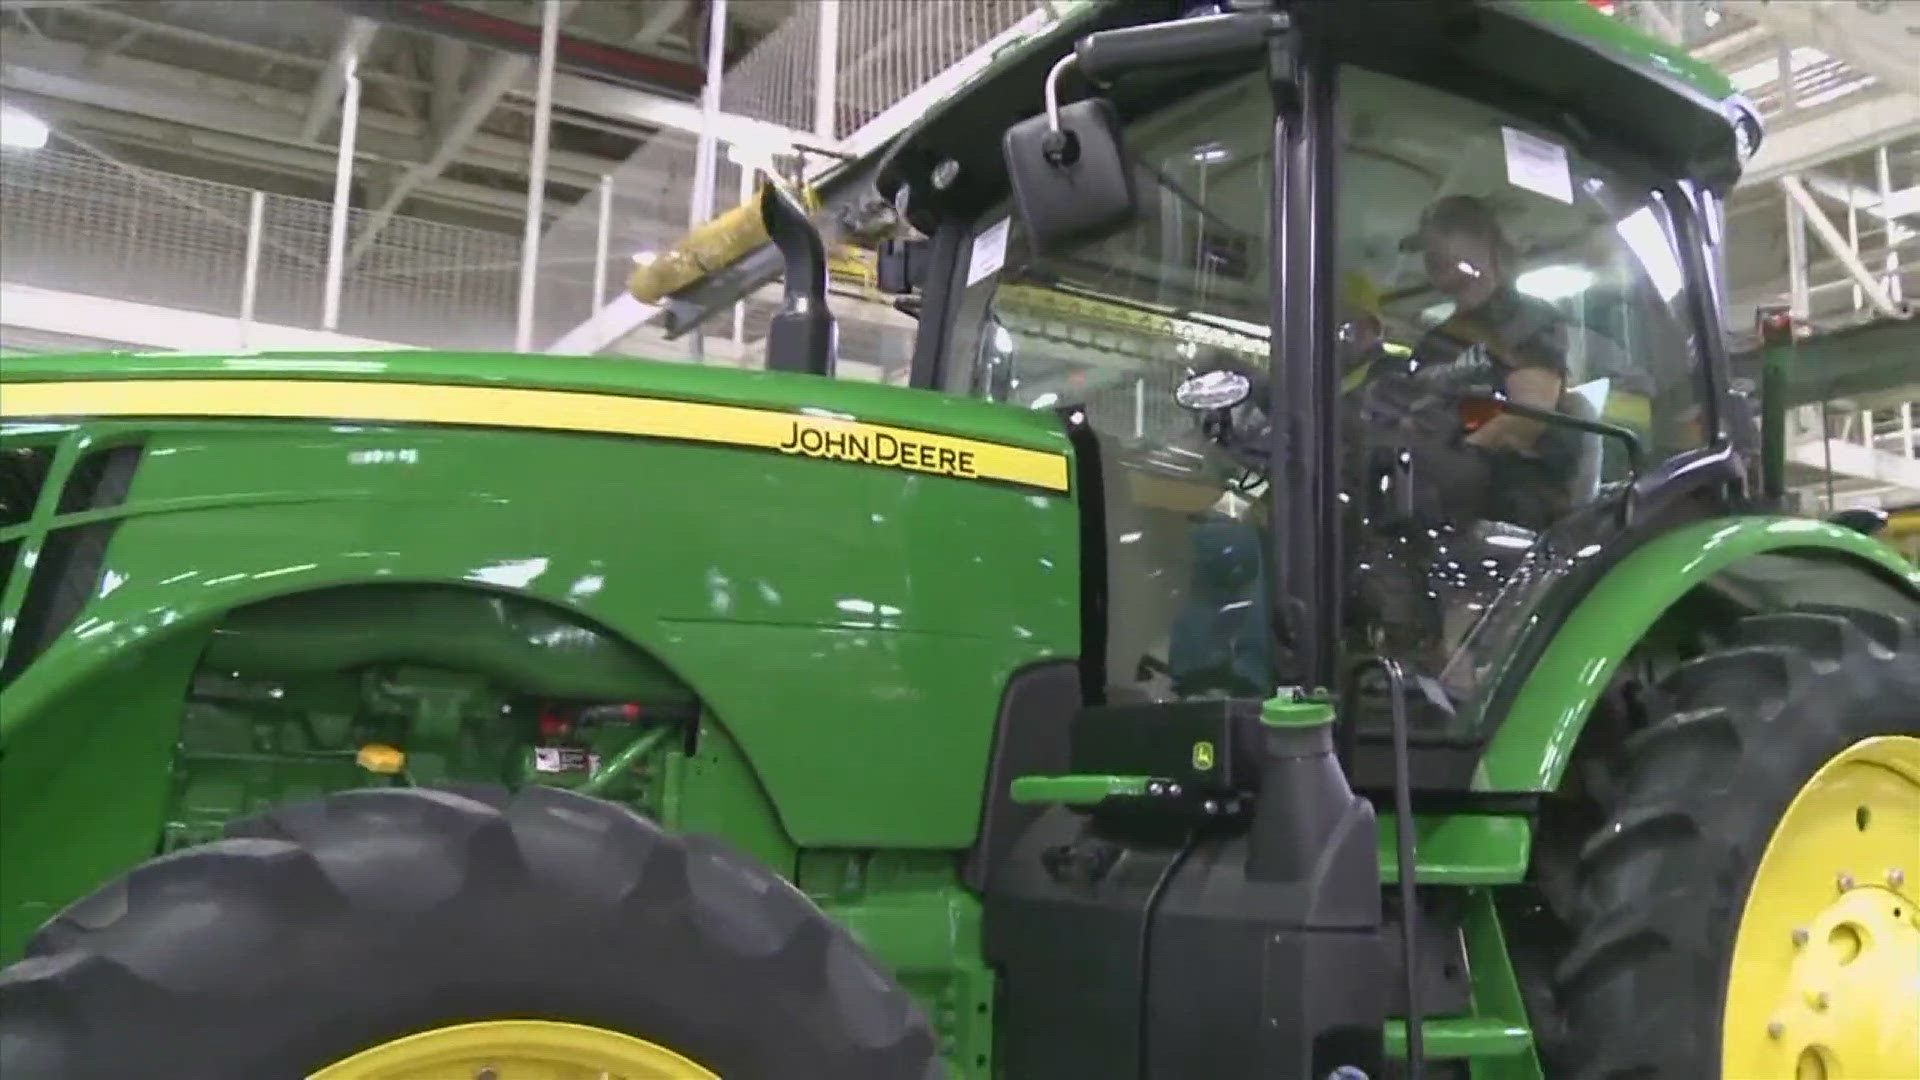 It comes after 308 workers were just laid off last month at the same facility. Altogether, 500 John Deere employees have now been laid off in Waterloo since April.